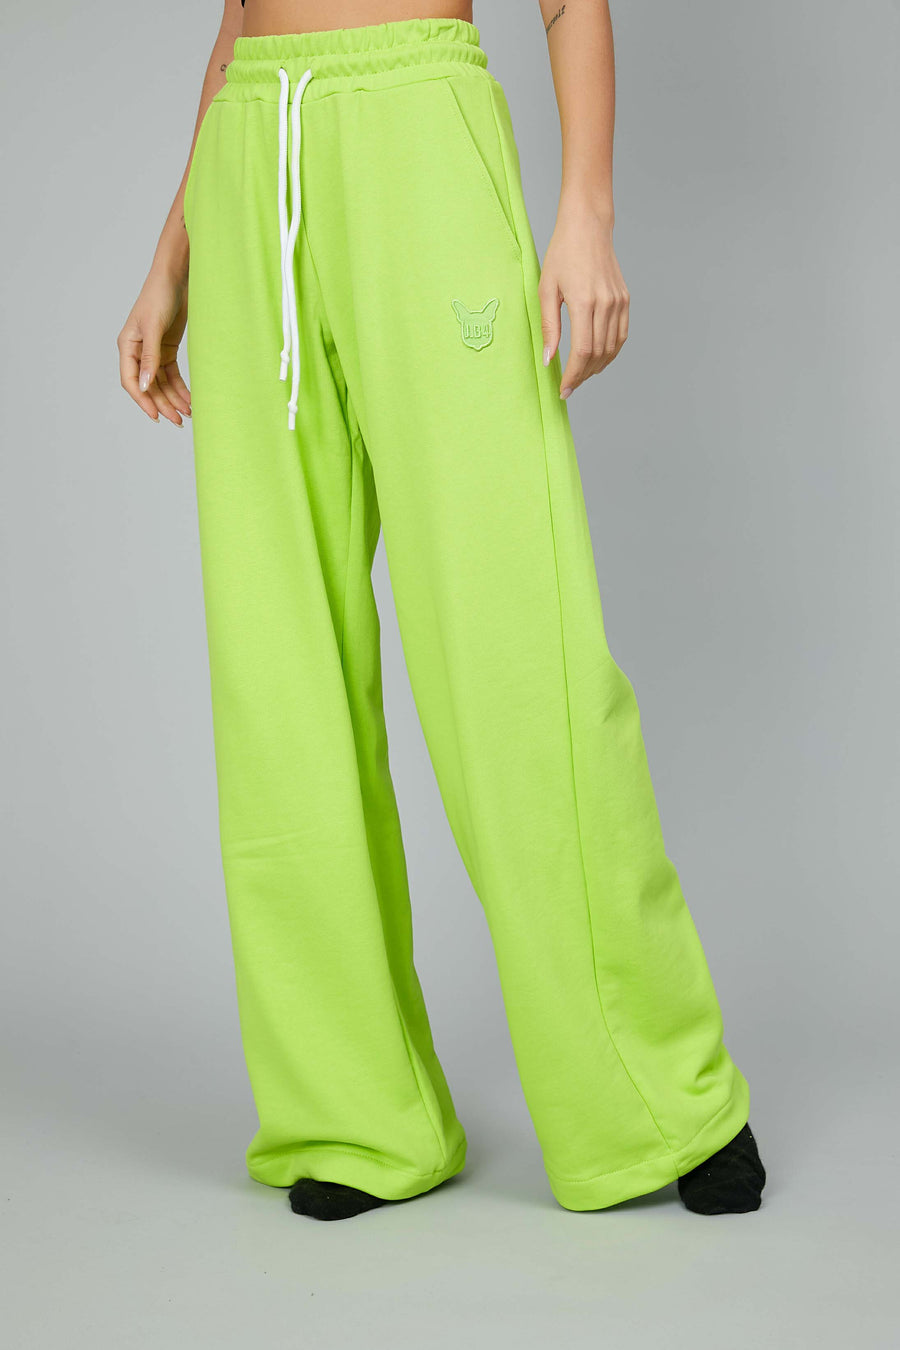 PITTBULL LIME FLARED TROUSERS